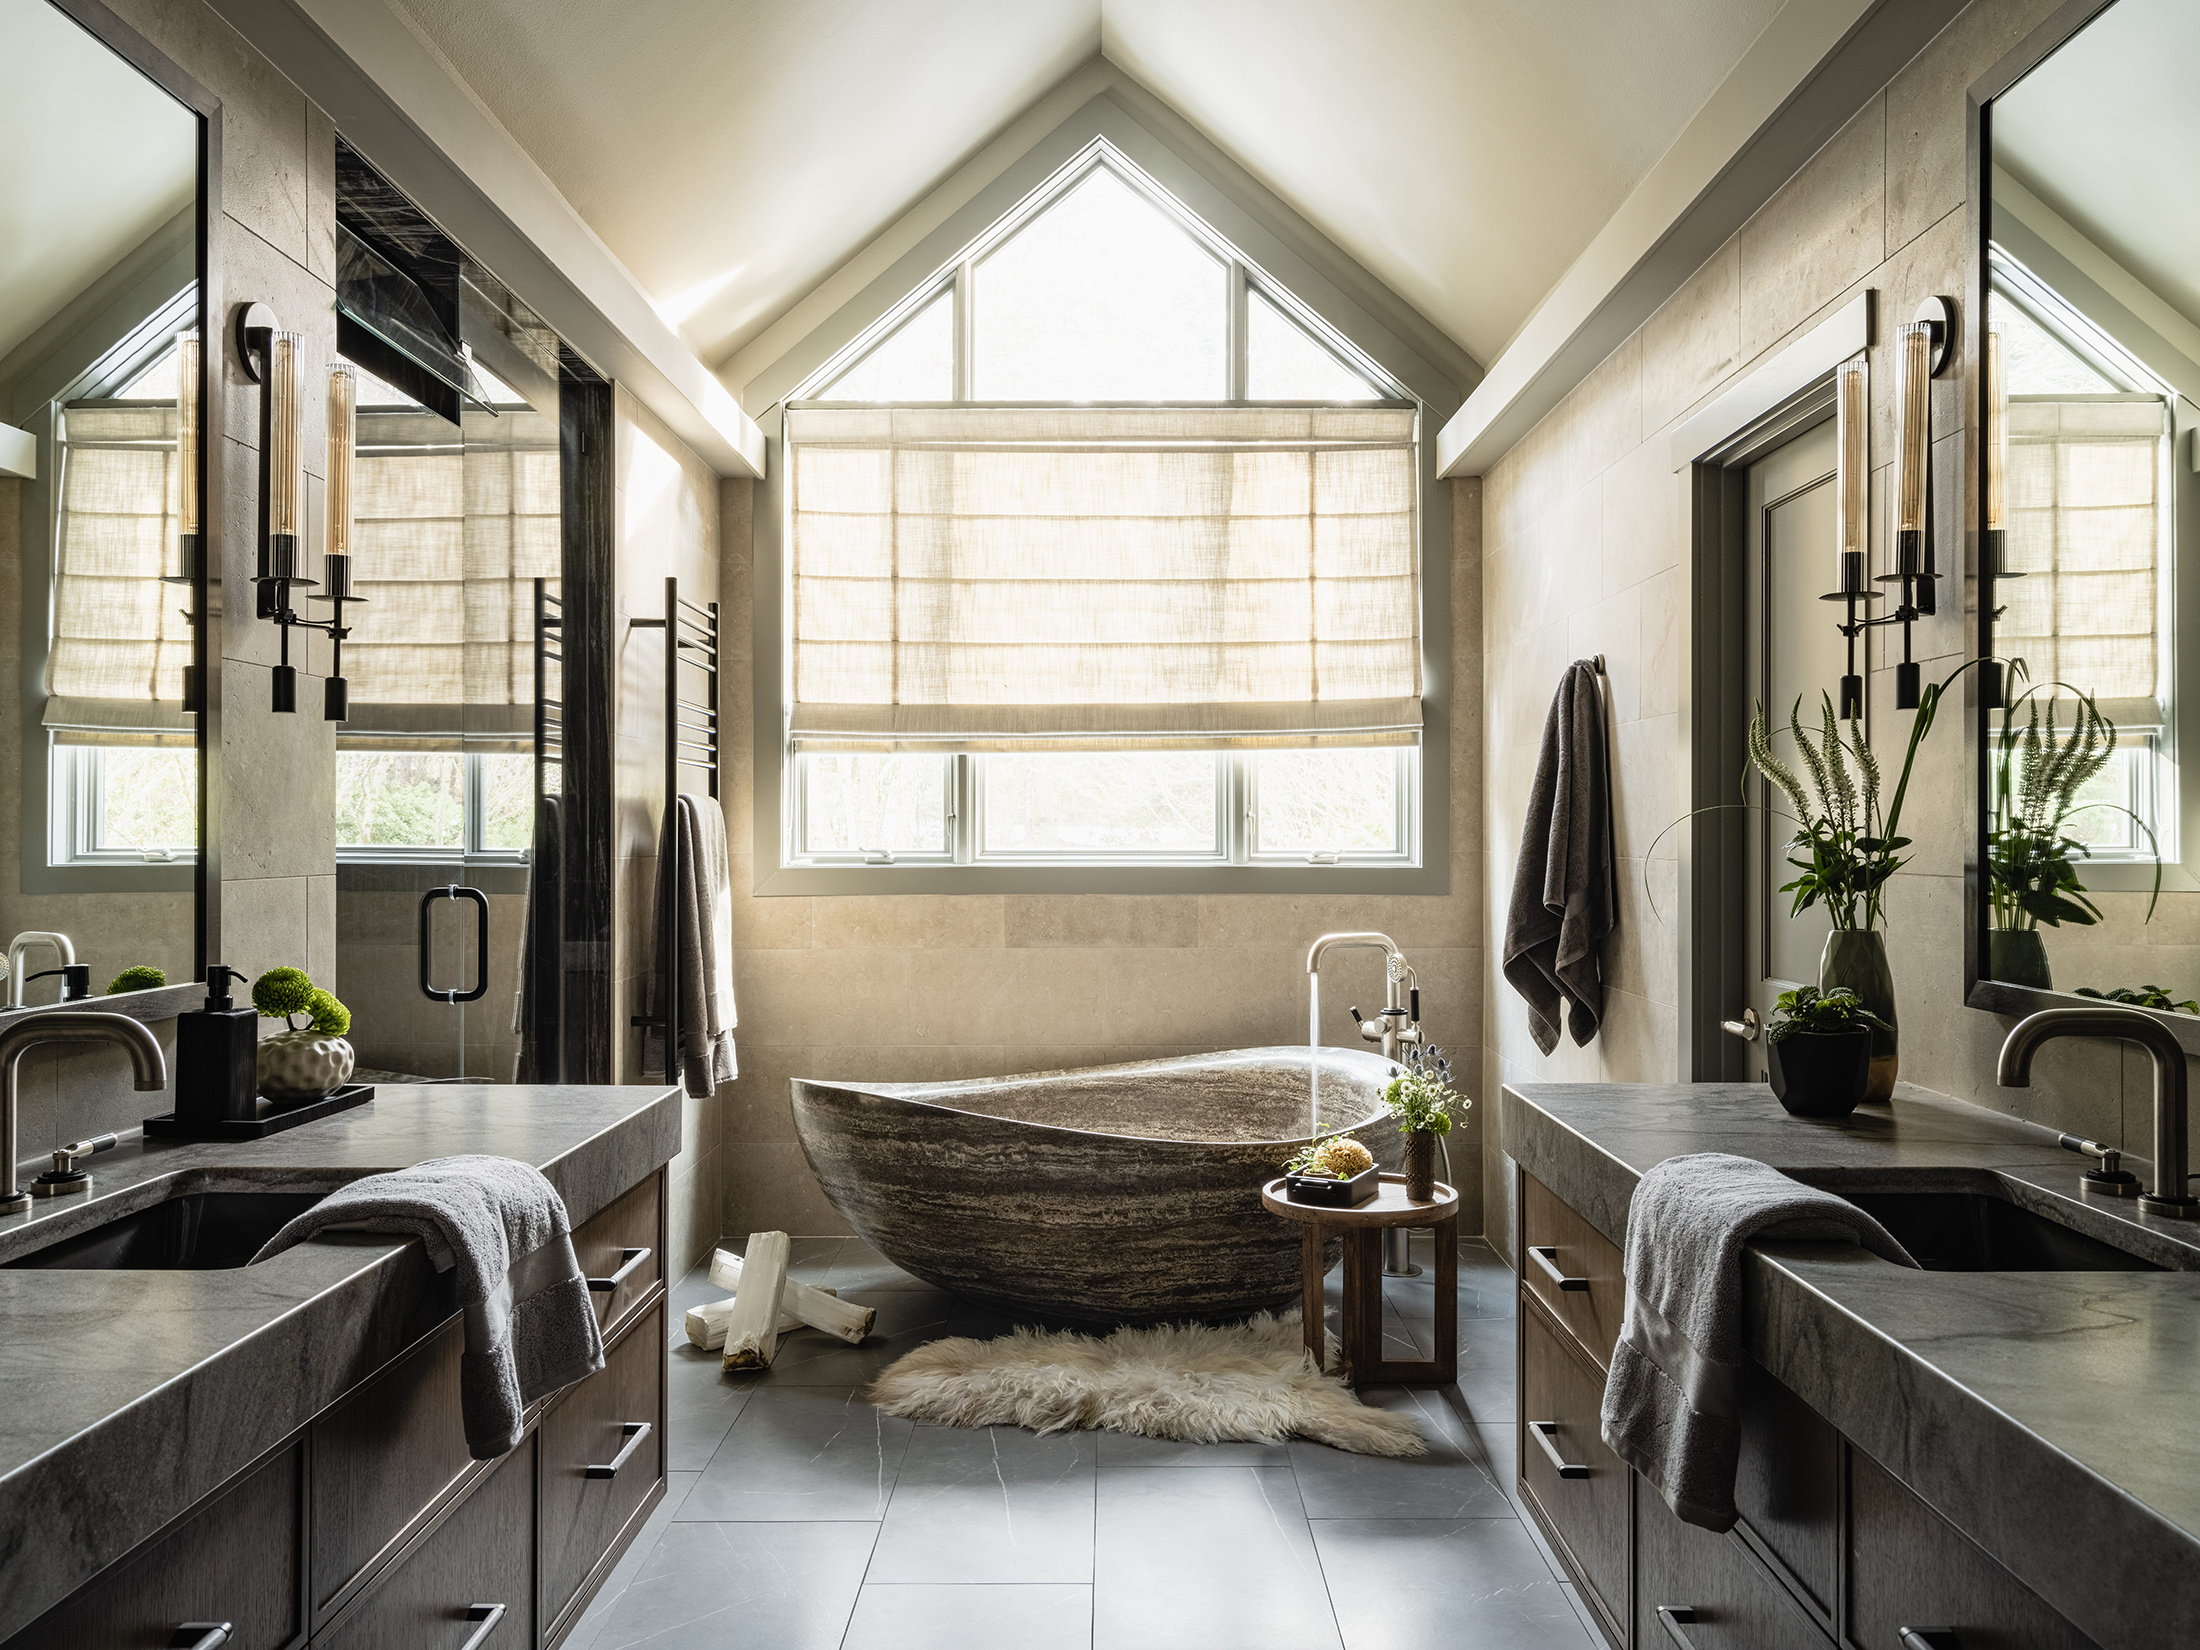 Featured image for “North Bend Luxury Bathroom”